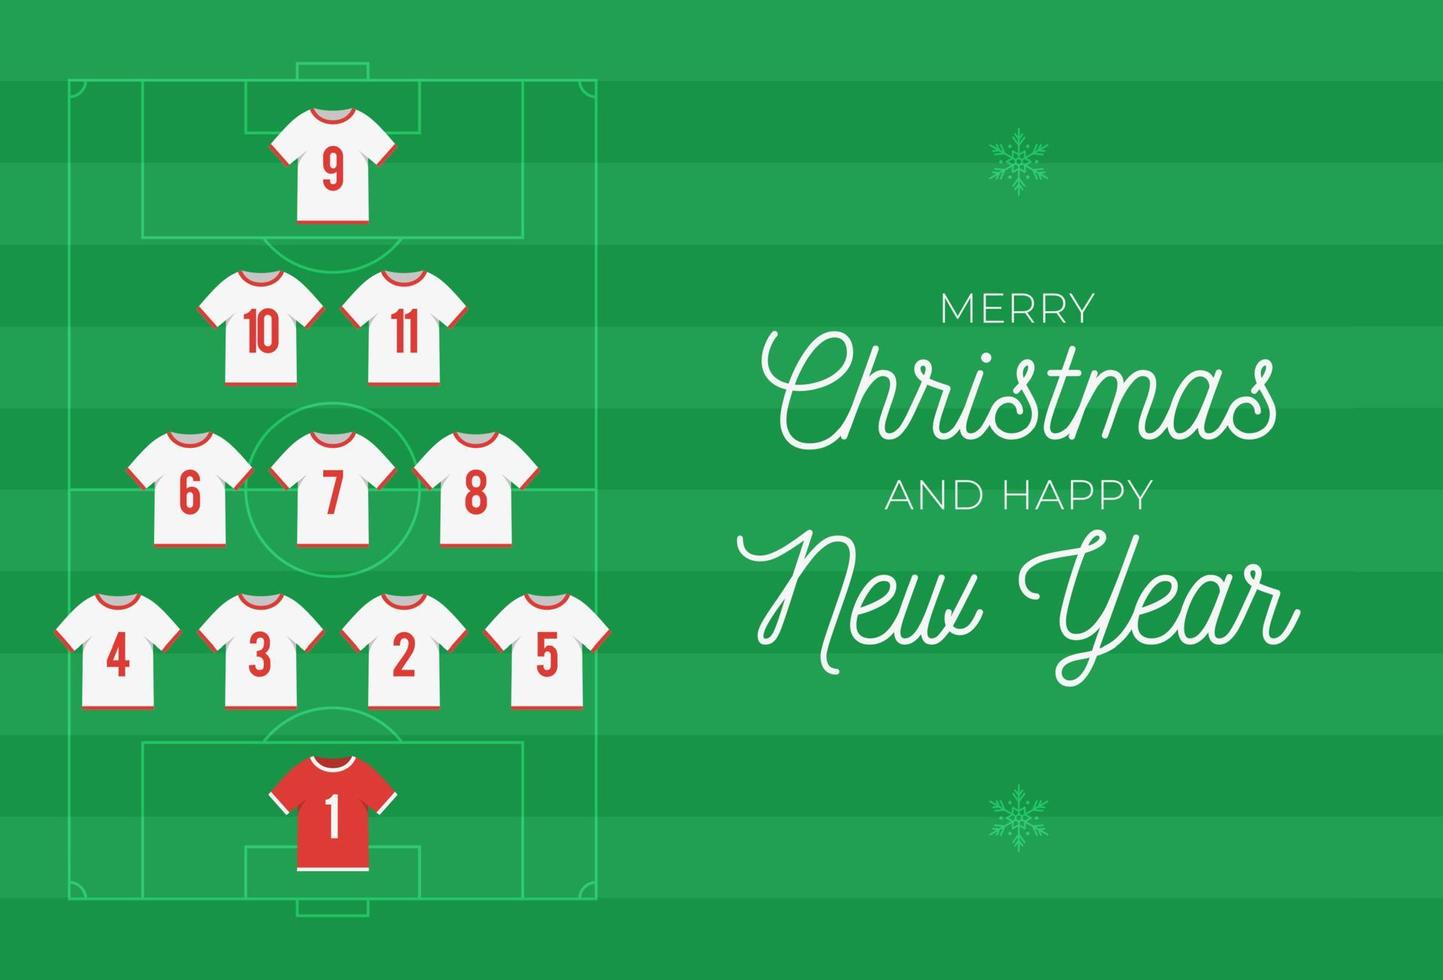 Christmas and new year greeting flat cartoon card. Creative Xmas tree made by football soccer shirt on football field background for Christmas and New Year celebration. Sport greeting card vector